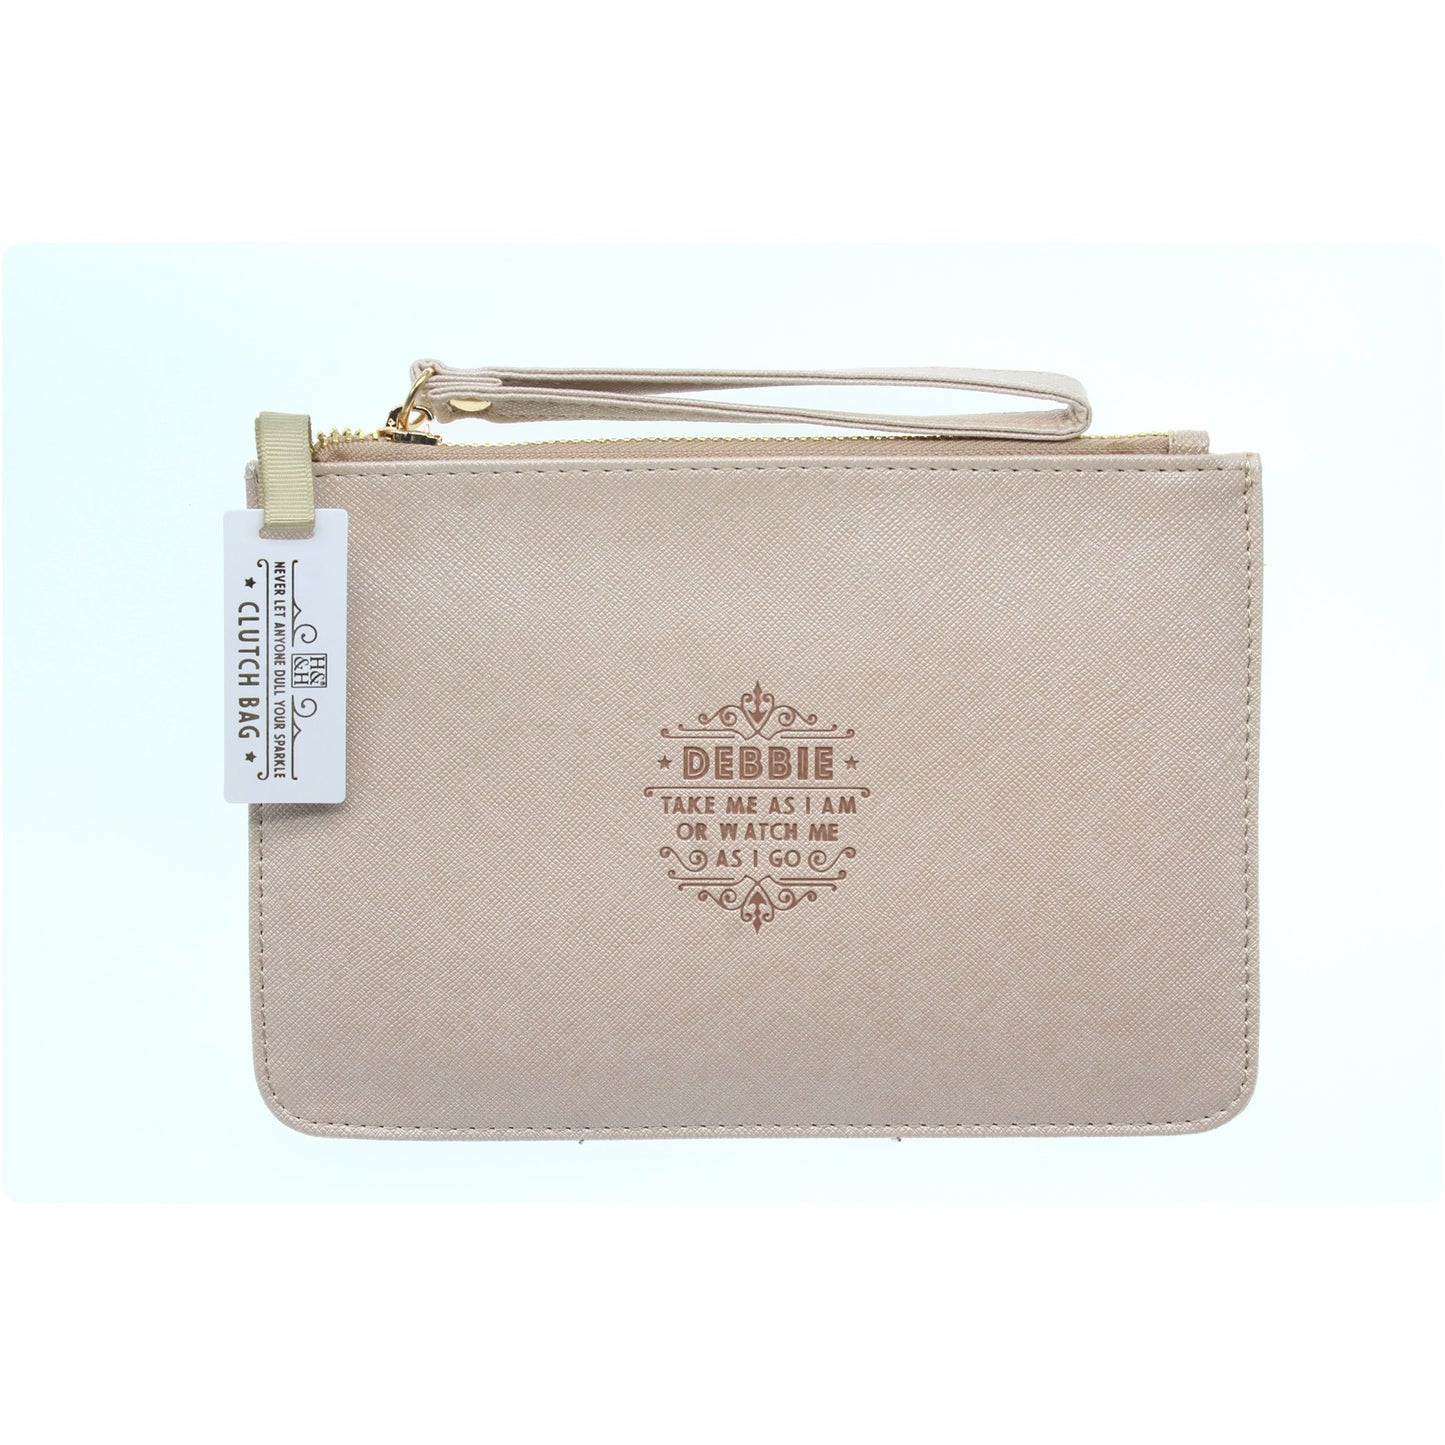 Clutch Bag With Handle & Embossed Text "Debbie"